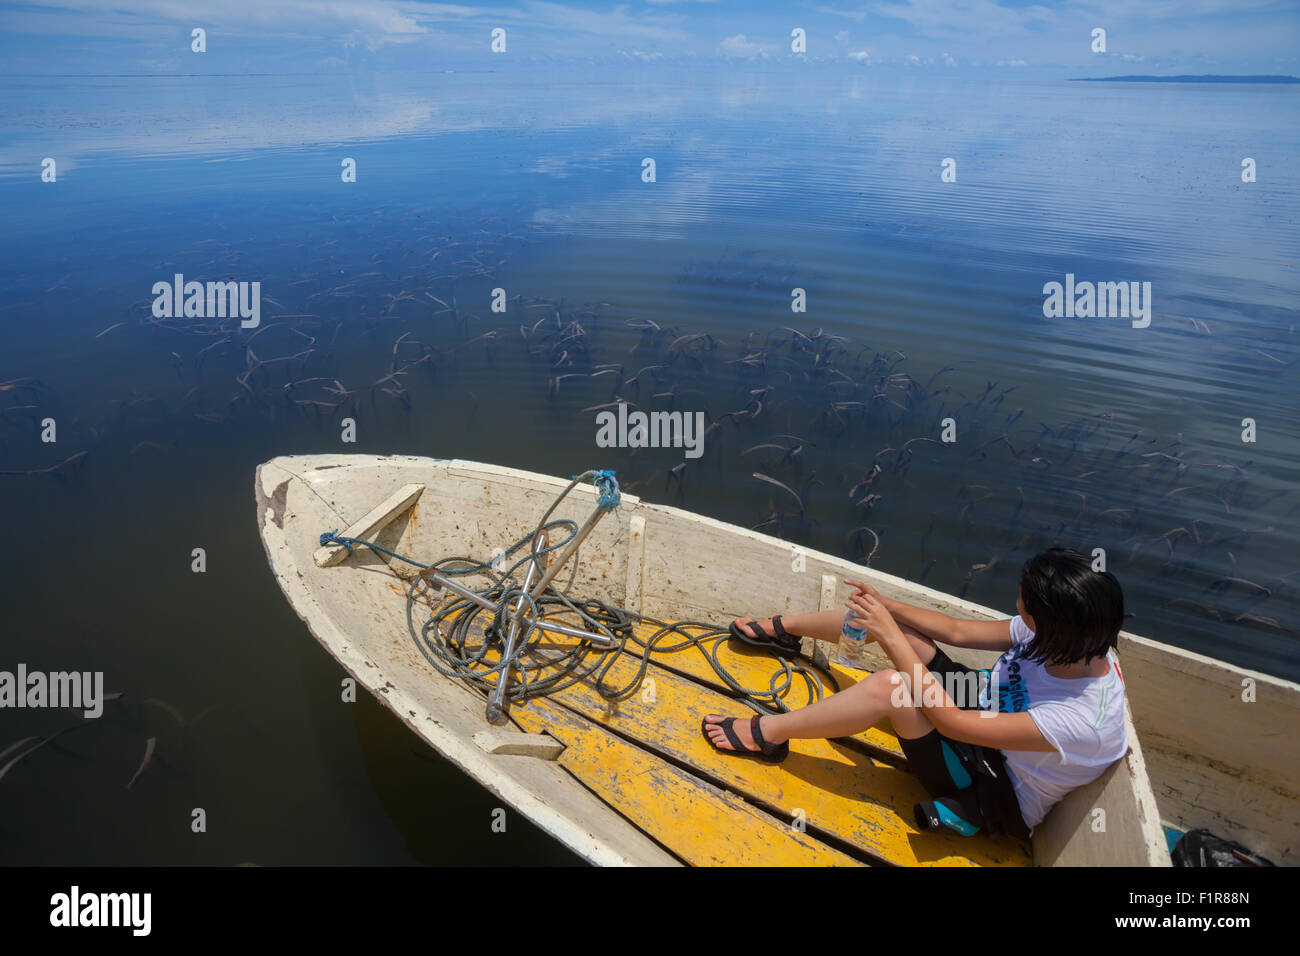 A journalist is photographed on boat, overlooking seagrass bed on the shallow water near Marsegu Island in Western Seram, Maluku, Indonesia. Stock Photo